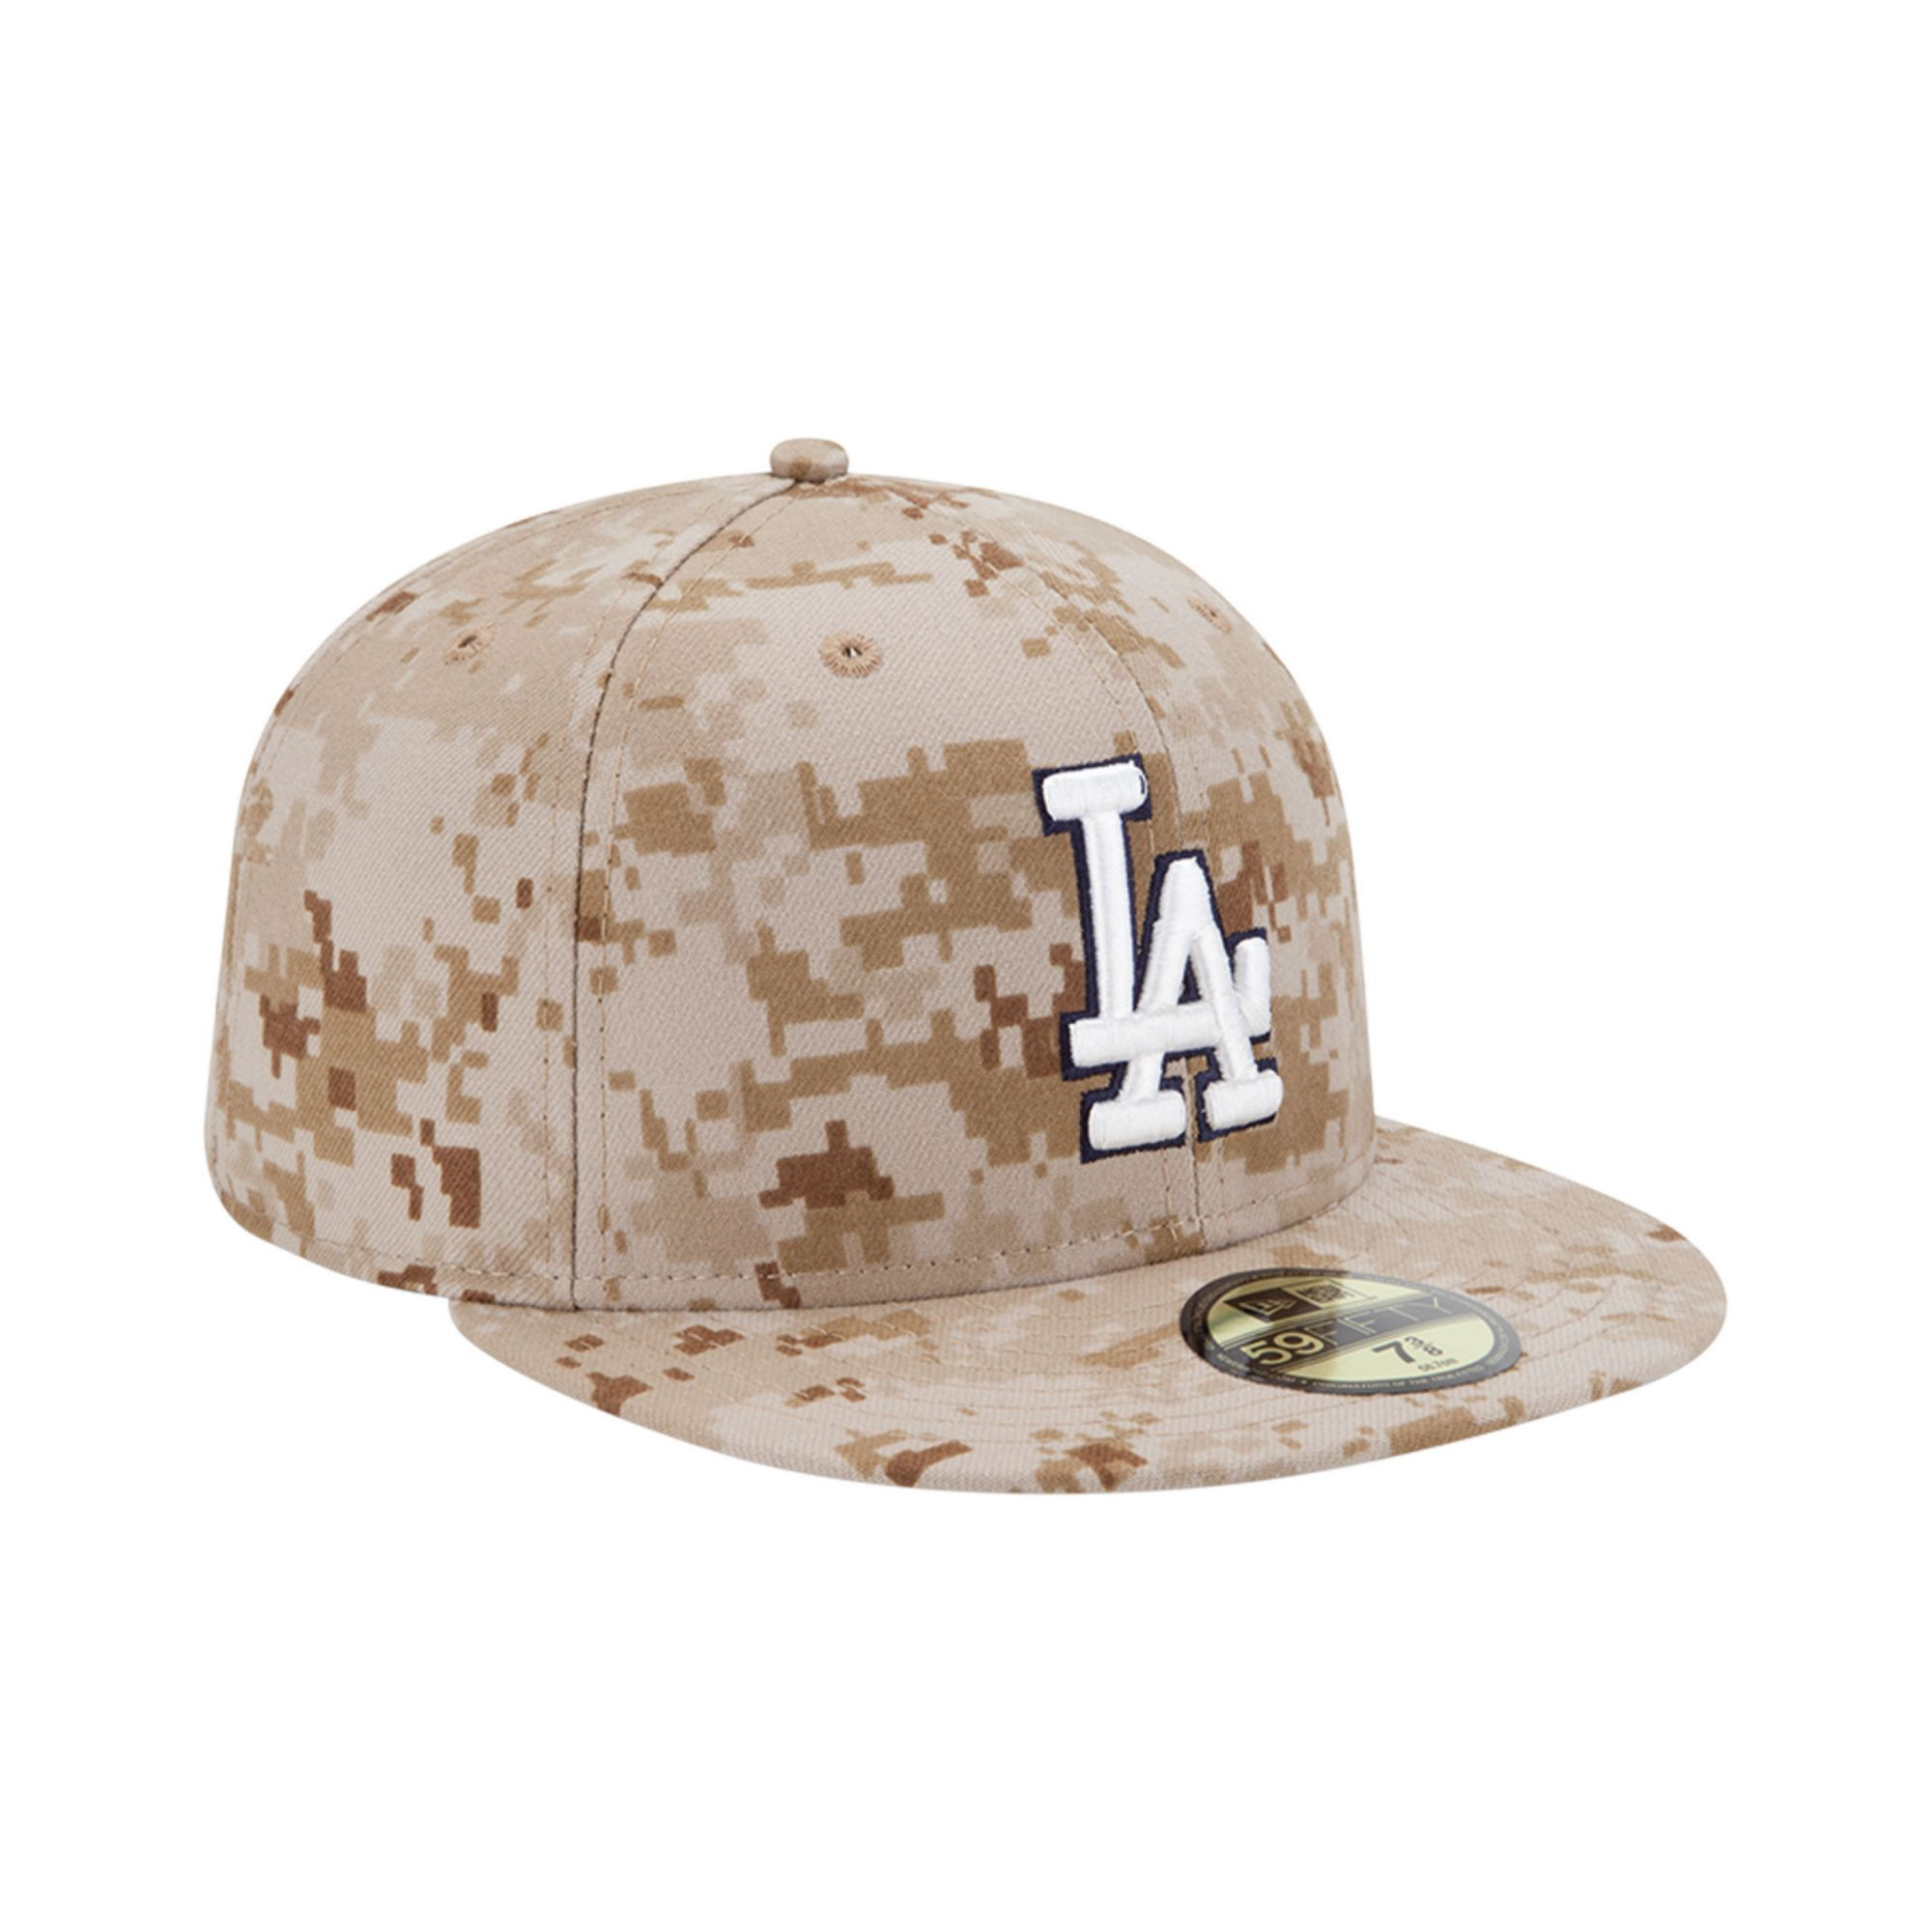 Dodgers wearing these caps for Memorial Day - True Blue LA